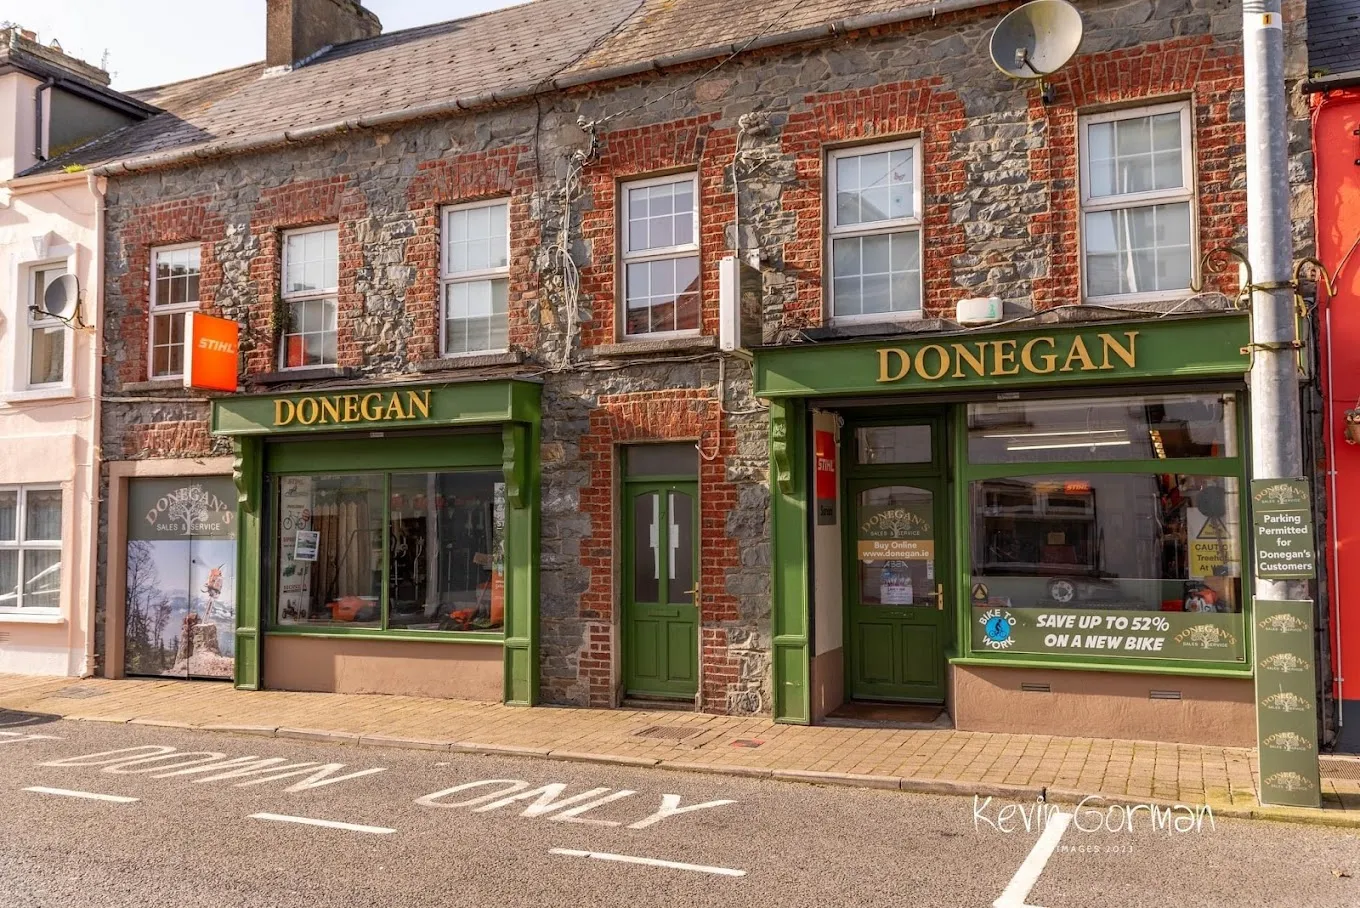 Welcome to Donegans - Irelands Leading Arborist Supplies Shop